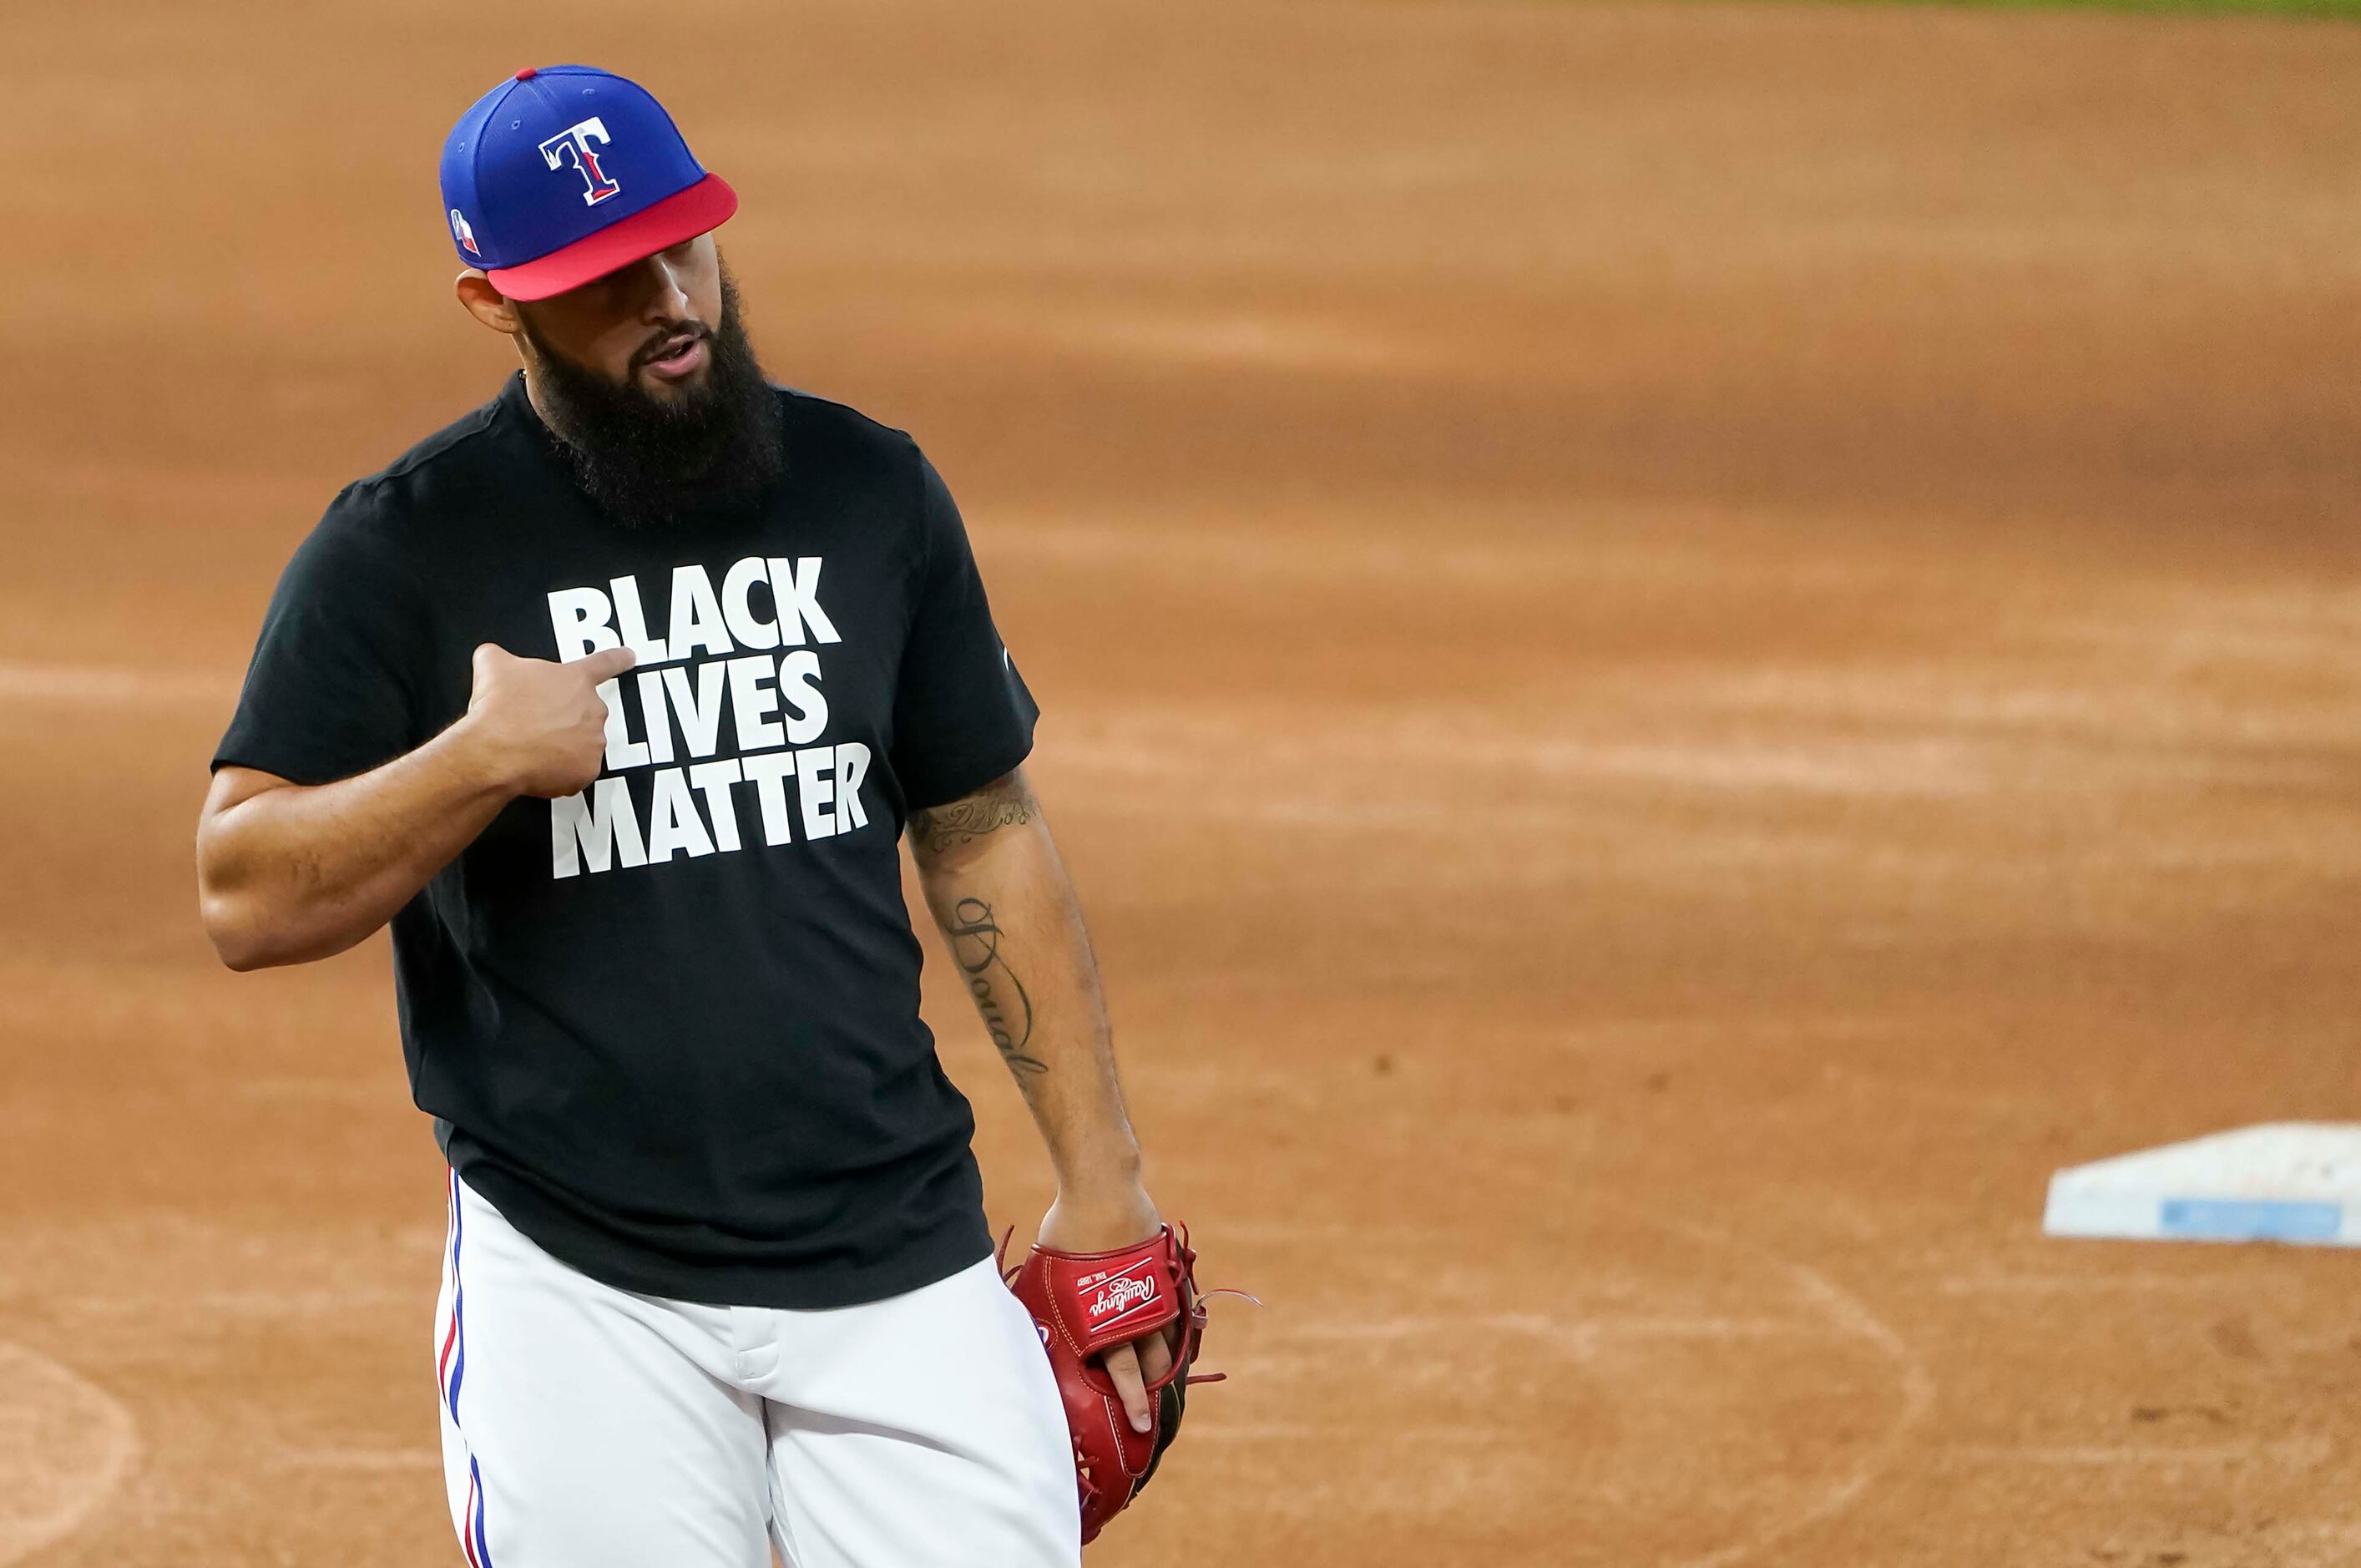 Texas Rangers second baseman Rougned Odor points to his t-shirt reading Black Lives Matter...